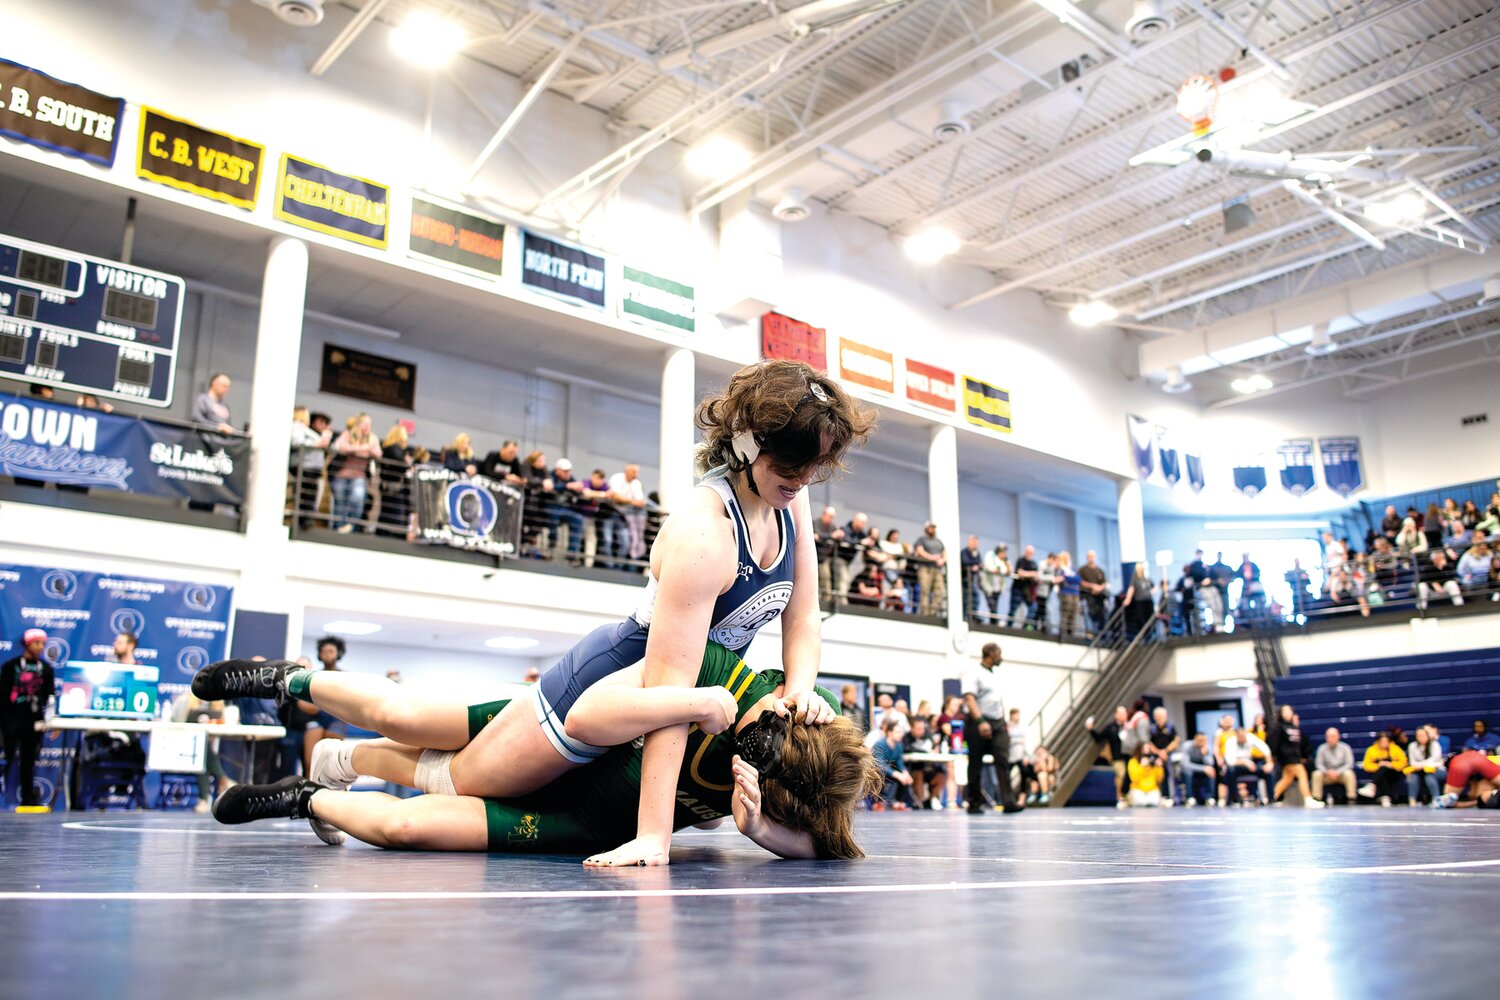 The crowd watches Central Bucks’ Isabella Priano’s 170-pound match against Olivya Kroope of Emmaus.